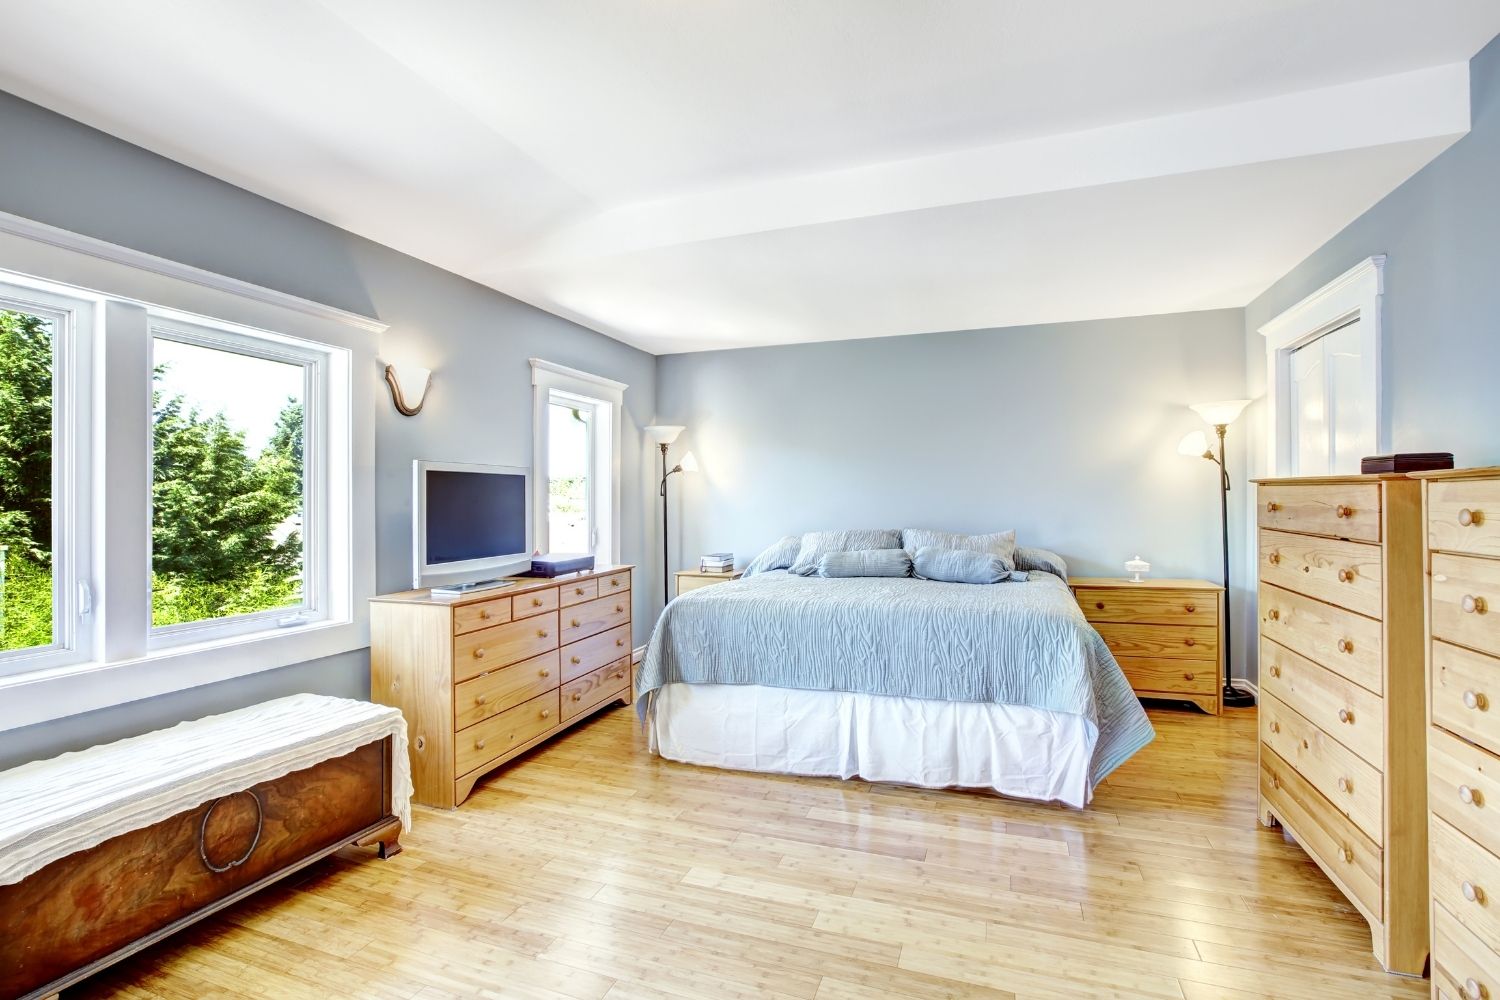 What color trim goes with blue walls?